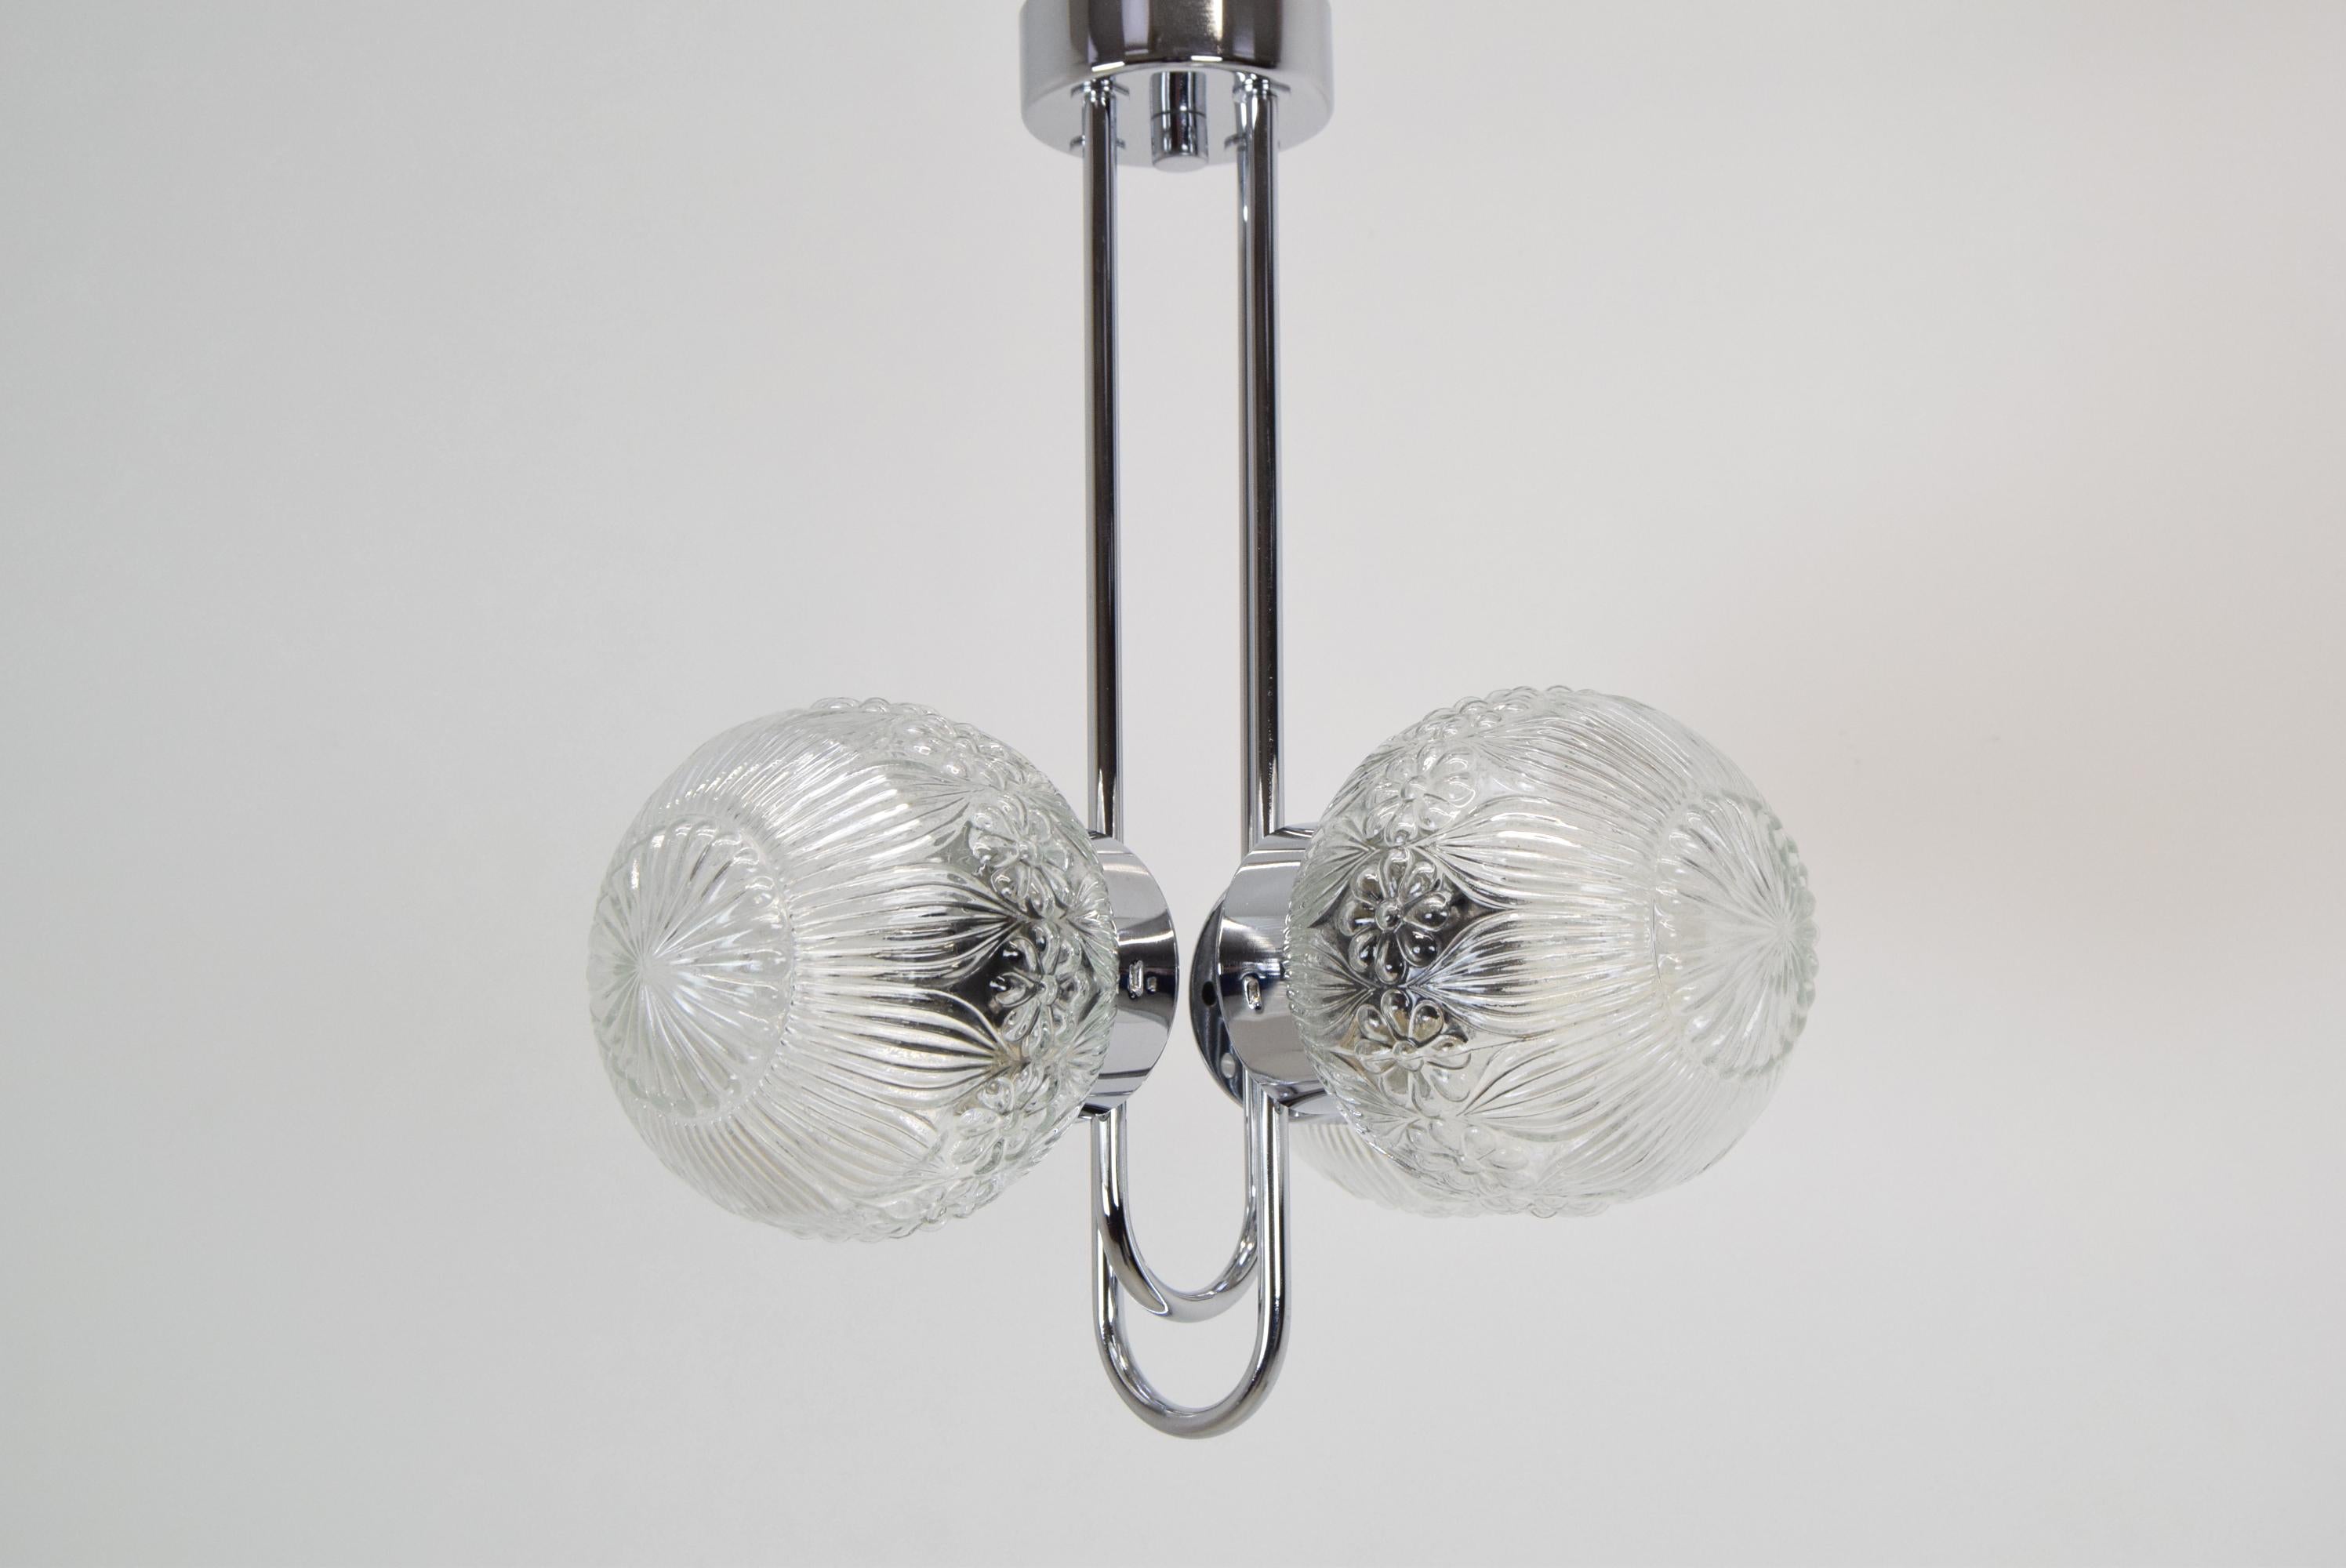 IT is possible to buy one piece
Made in Czechoslovakia
Made of Glass, Chrome
4x60W, E27 or E26 bulb
Fully Functional
US wiring compatible
Good original condition.
 